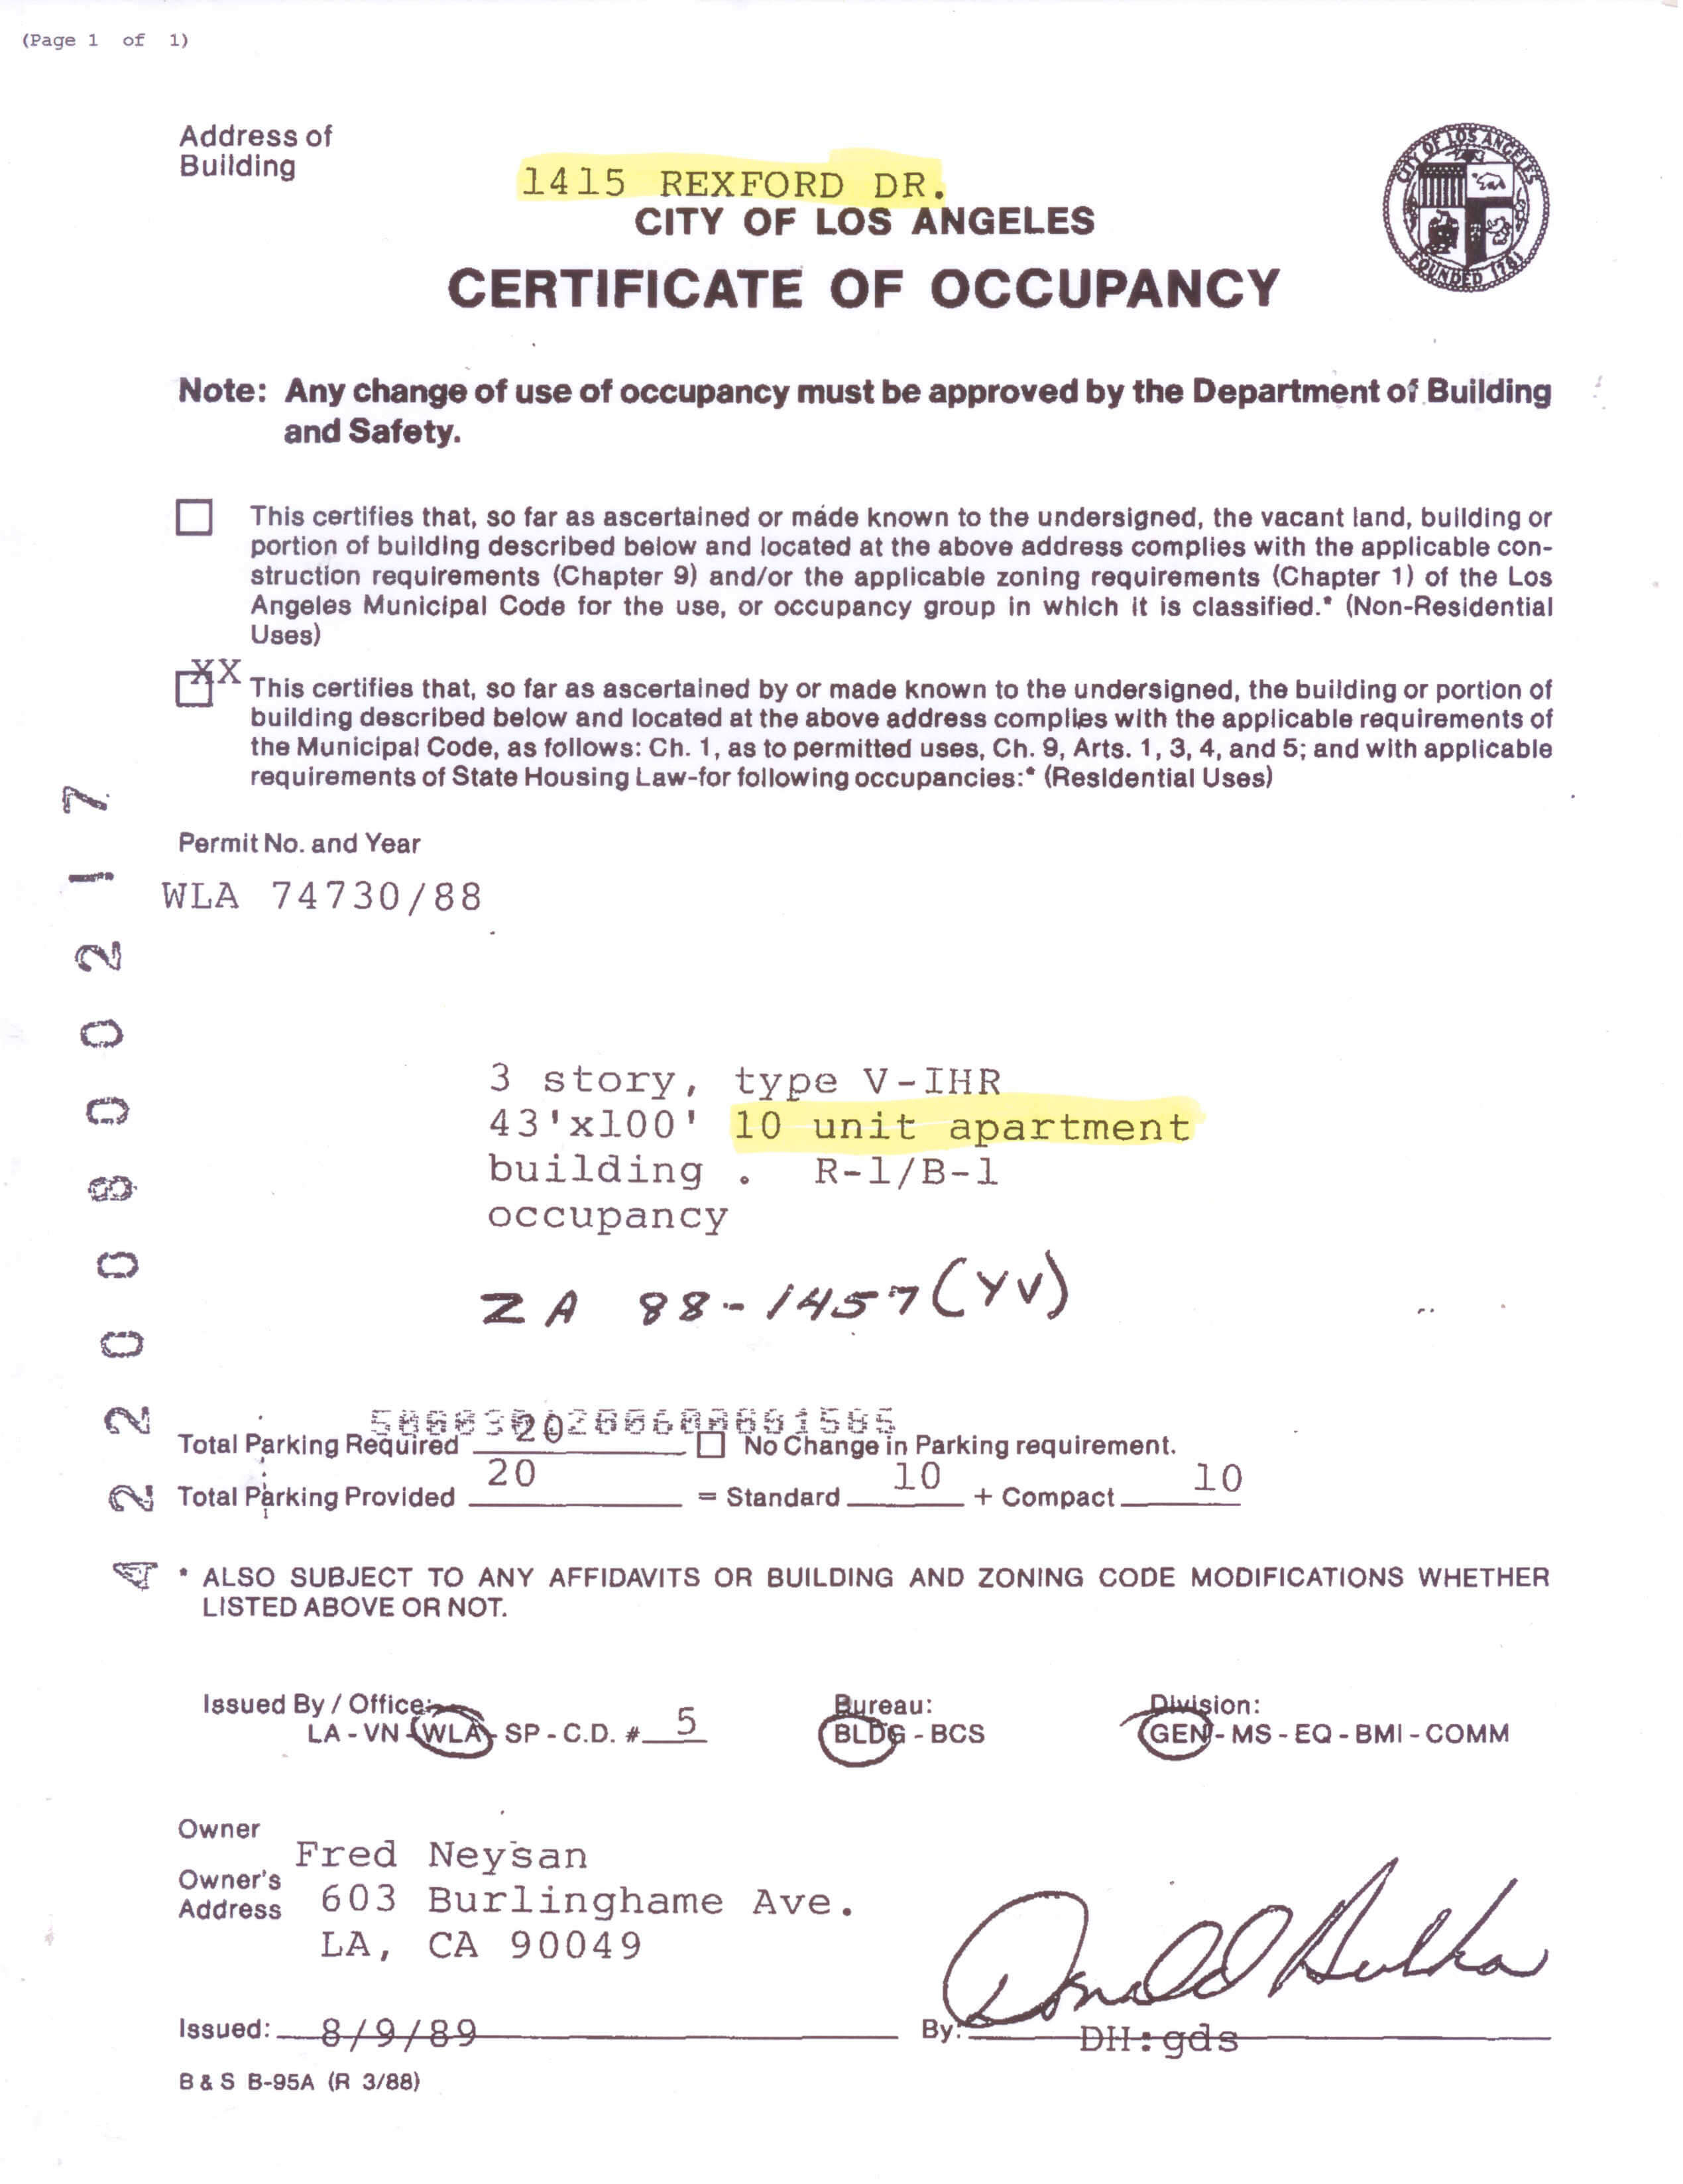 Material requirement form: Certificate of occupancy for rentals